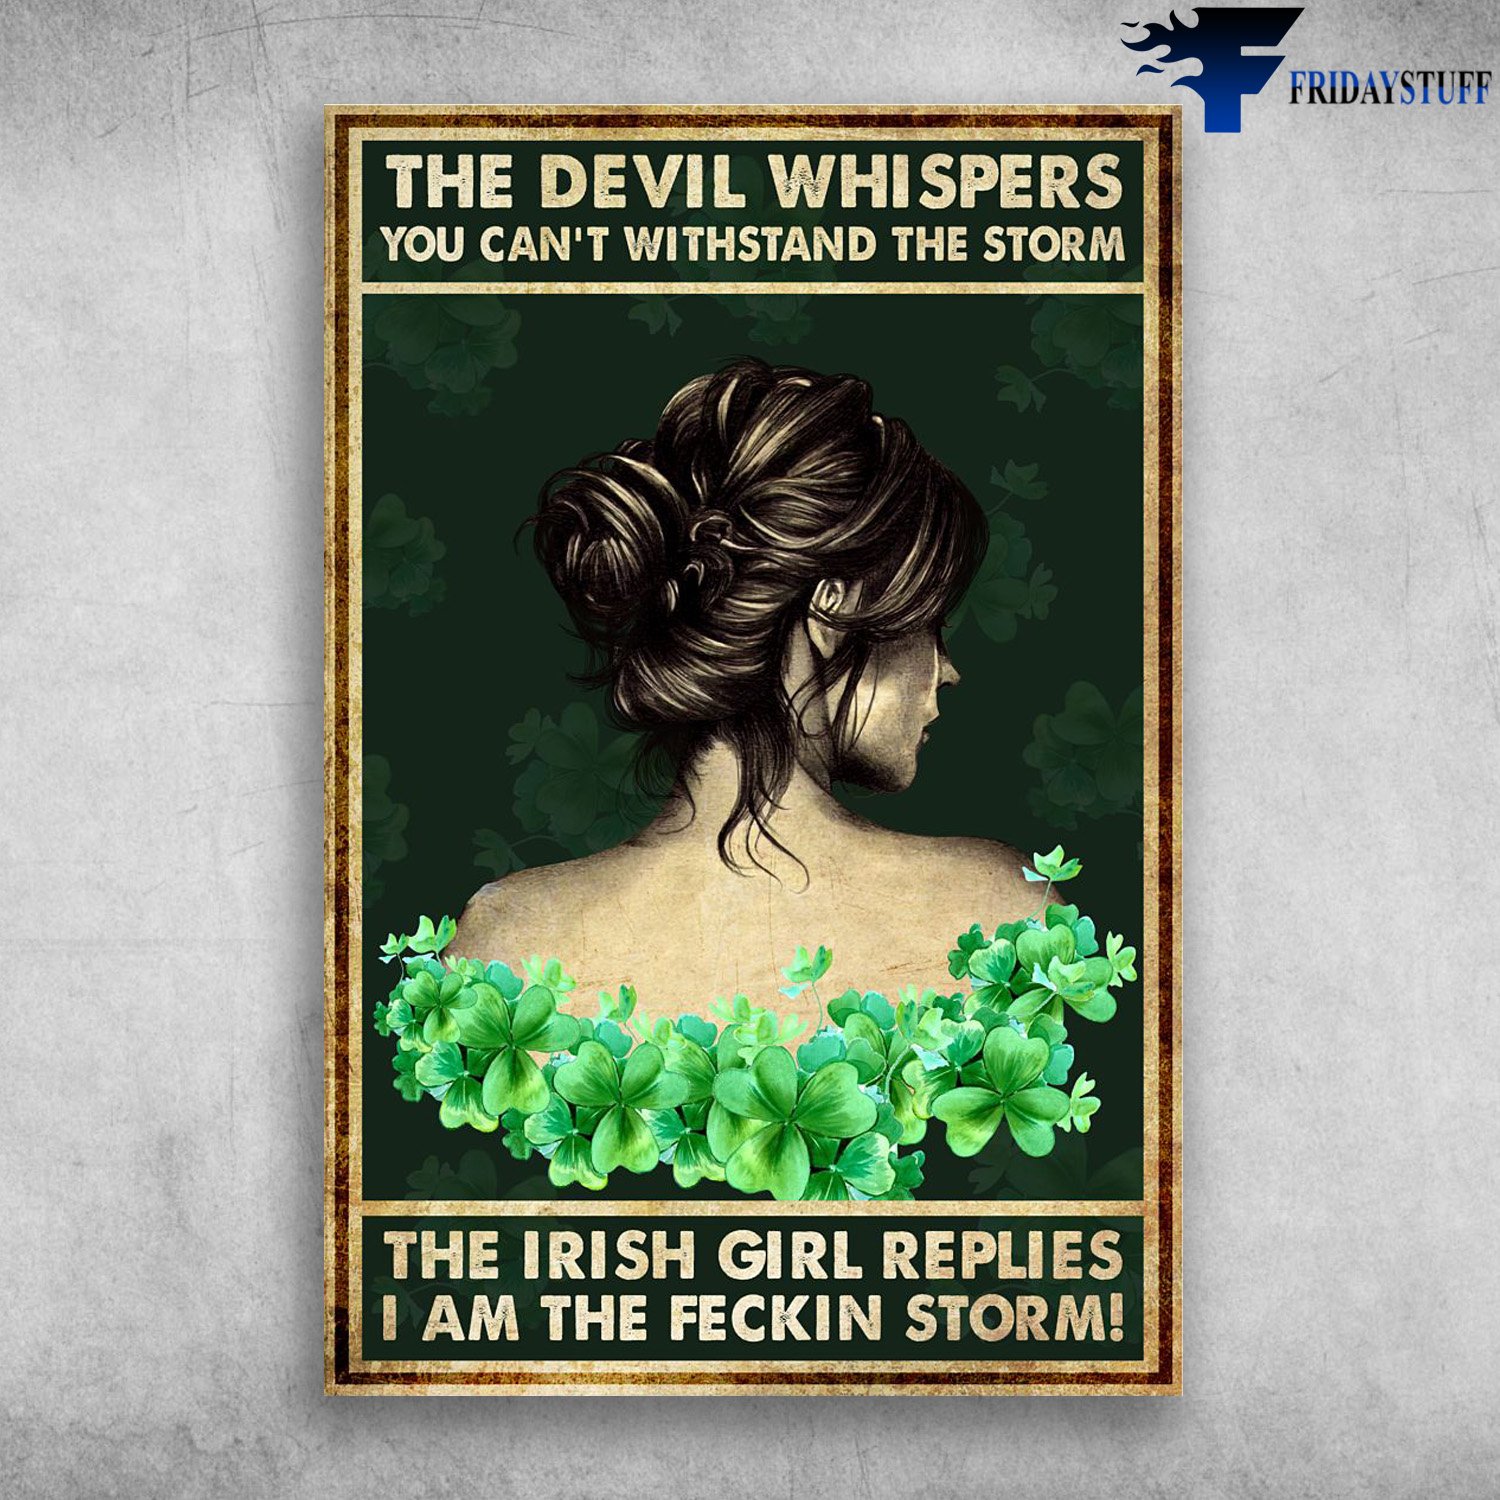 The Devil Whispers - You Can't Withstand The Storm, The Irish Girl Re Plies, I Am The Feckin Storm